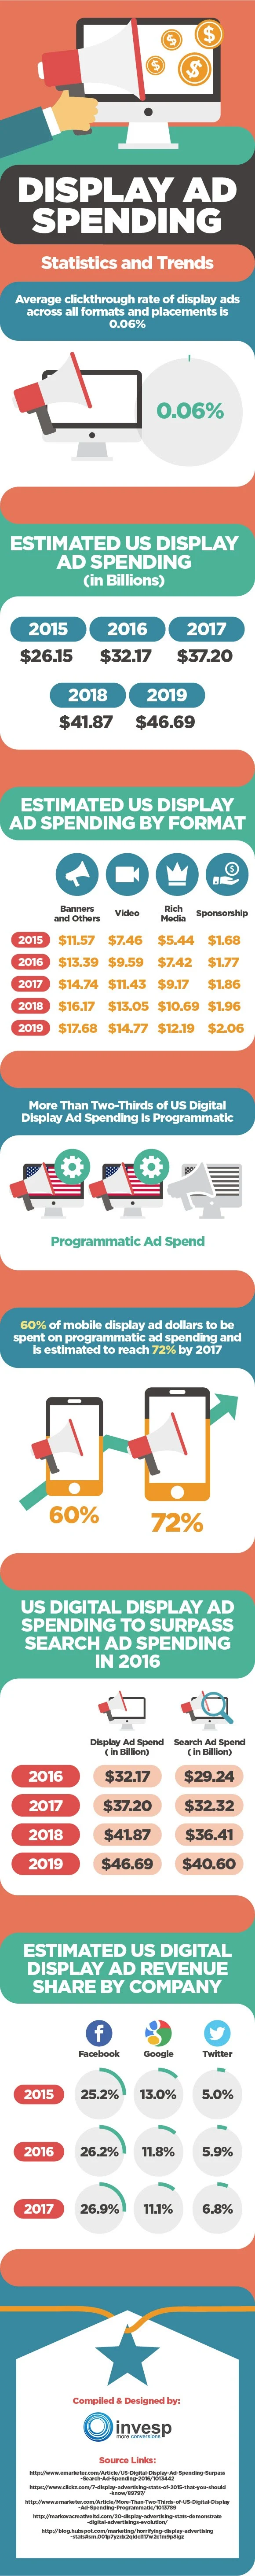 US Digital Display Ad Spending – Statistics and Trends - #Infographic